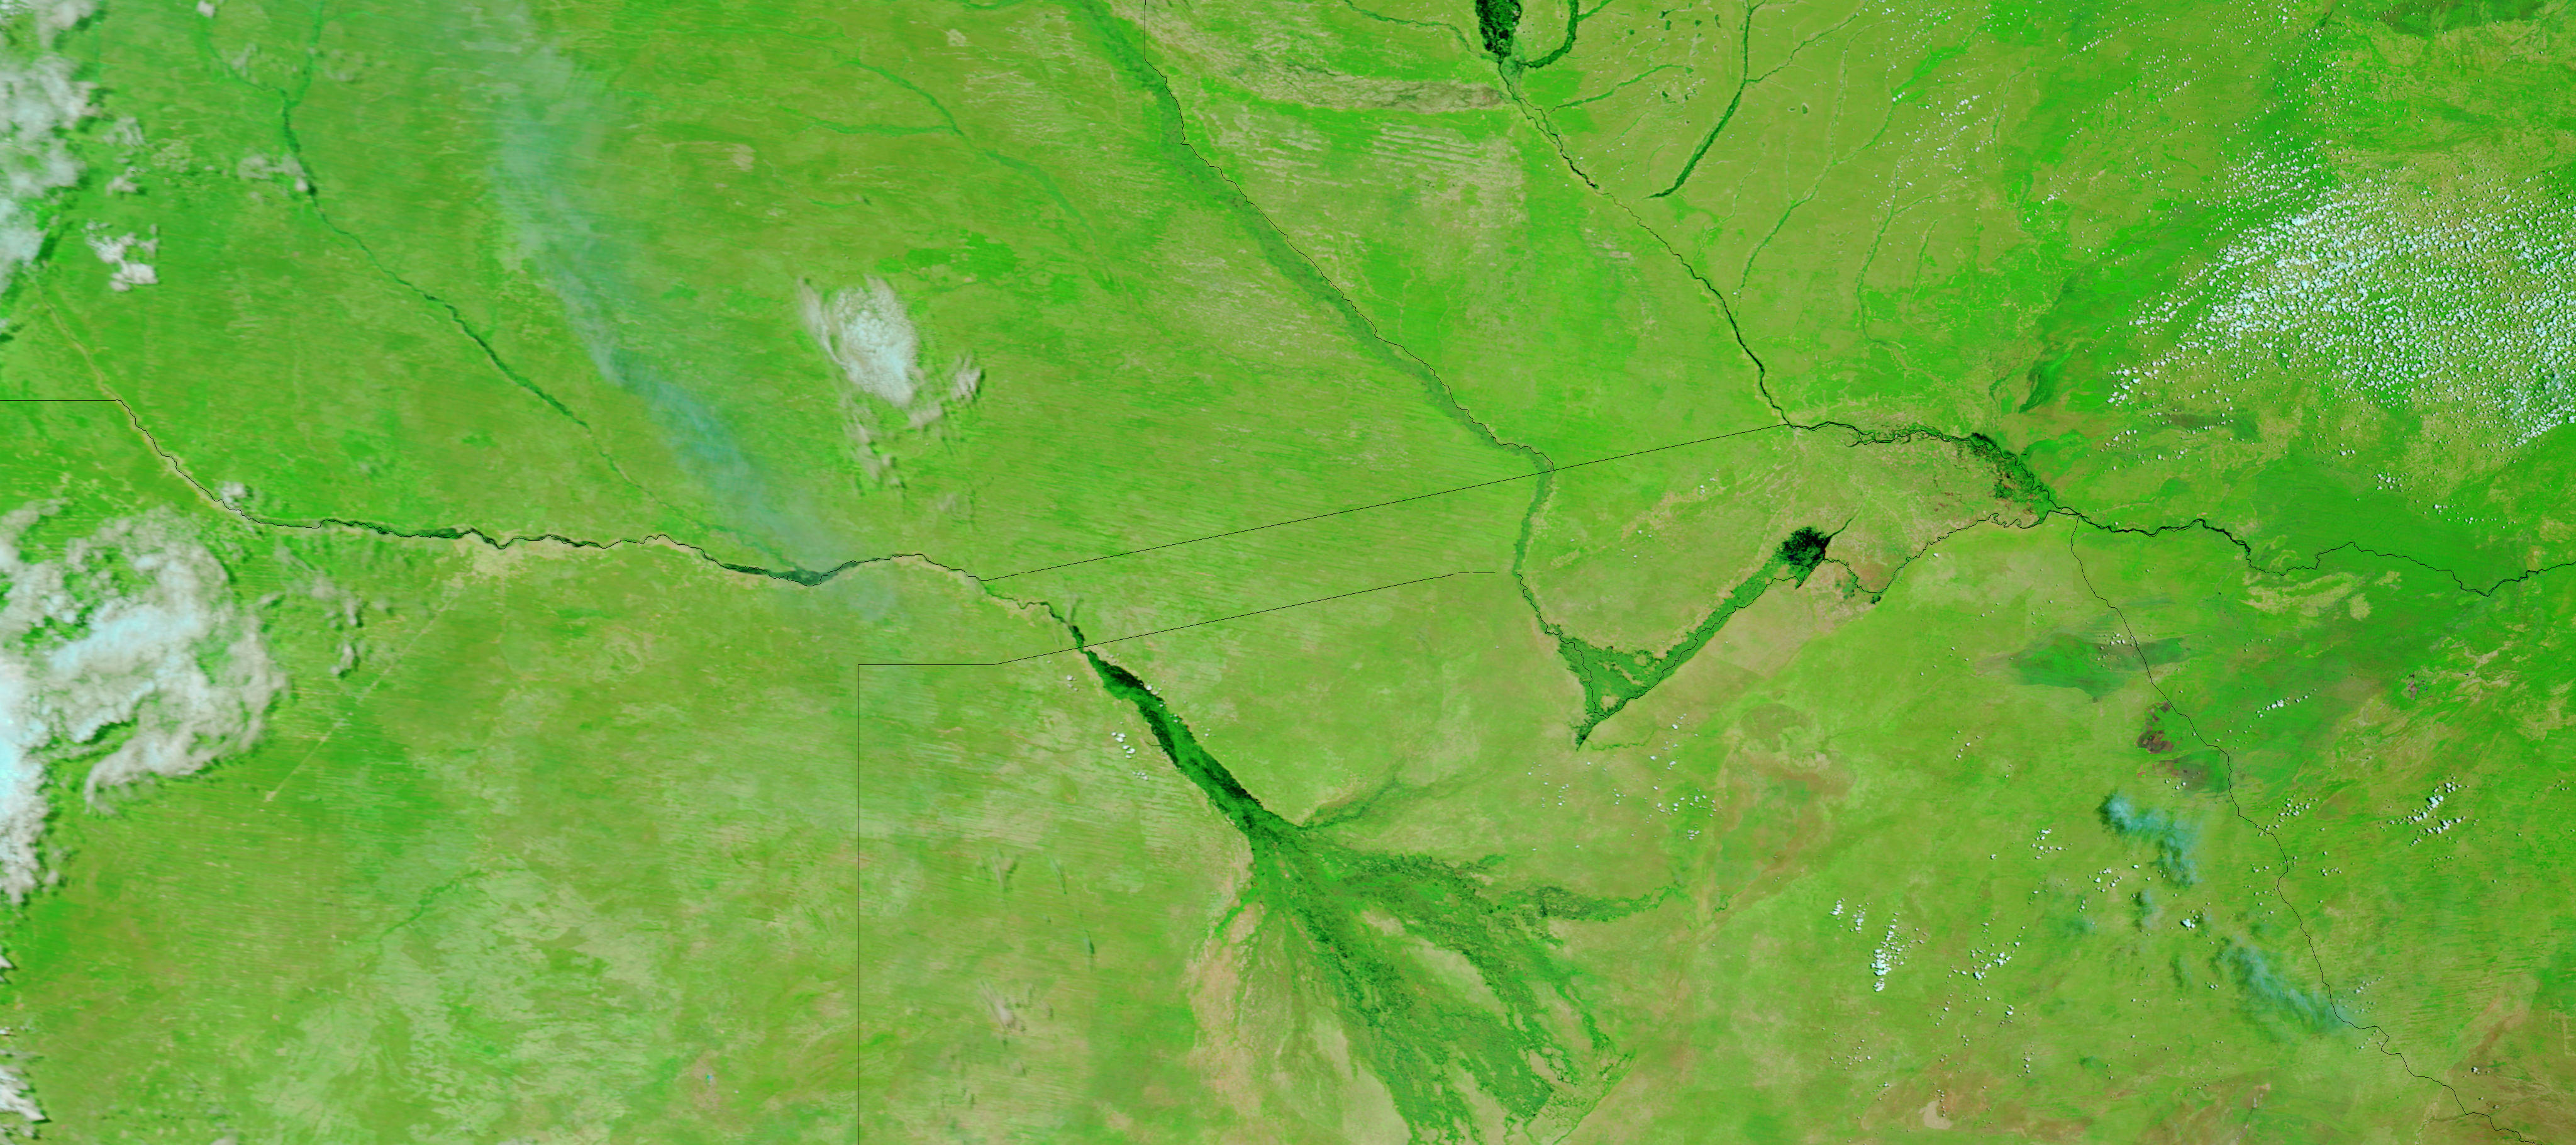 Flooding in Caprivi, Namibia - related image preview